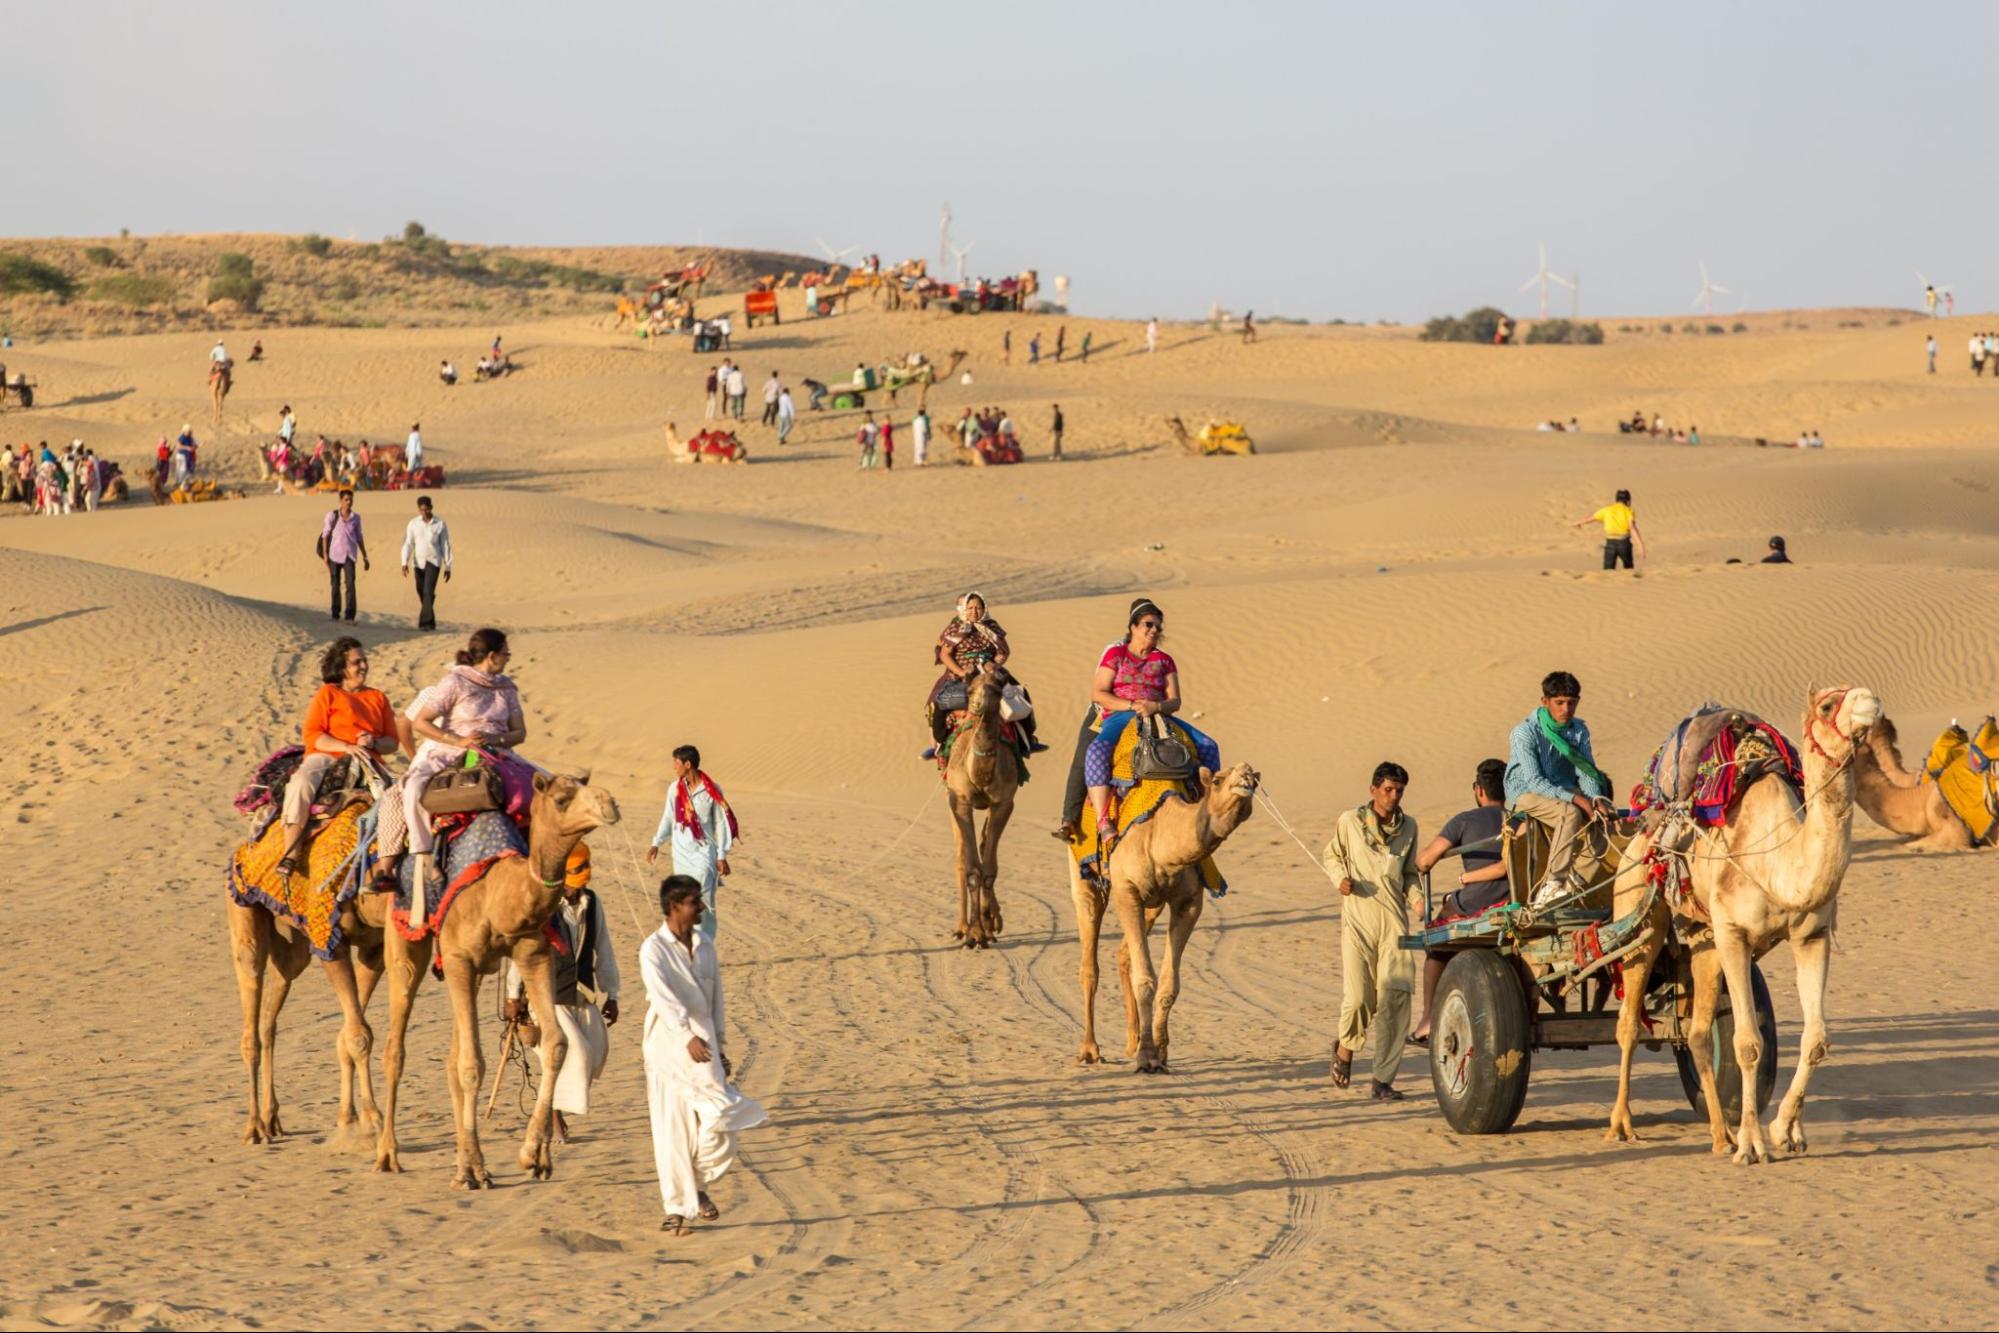 tourists riding camels in Thar desert, Rajasthan, India